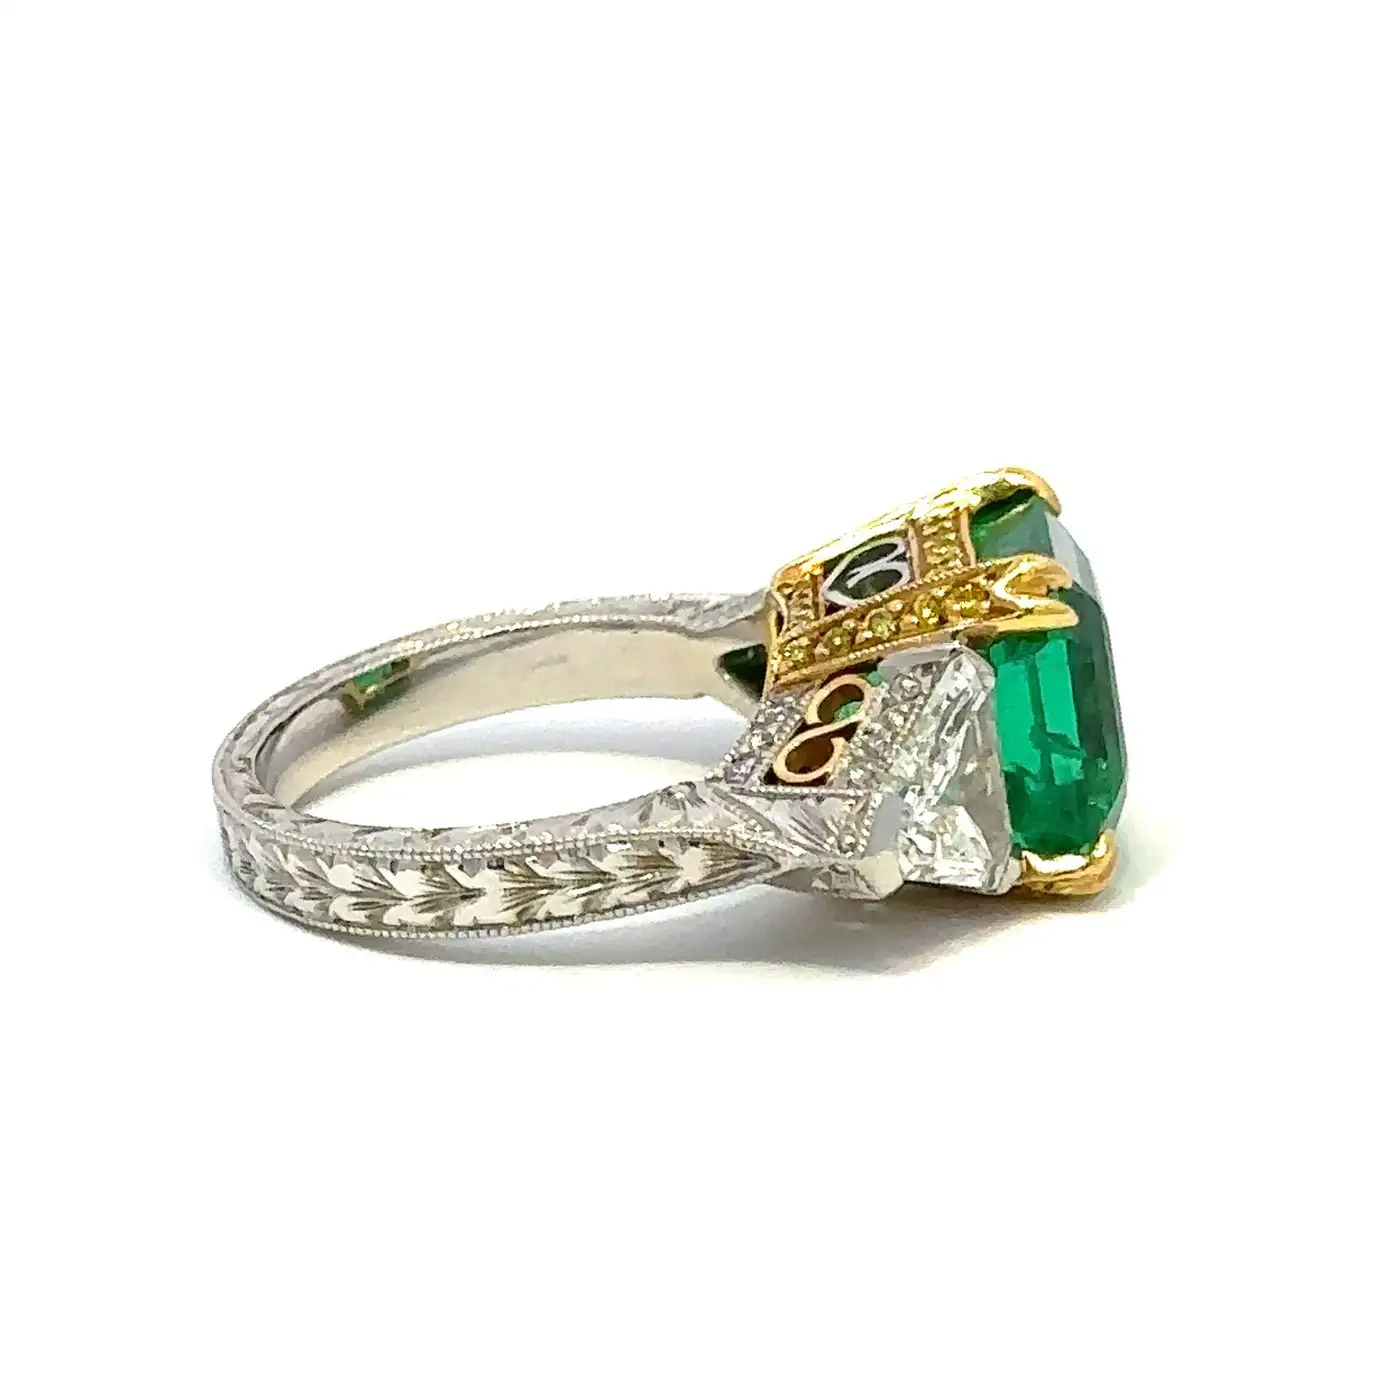 6.18-Carat-AGLAGTA-Certified-Colombian-Emerald-and-Diamond-Ring-4.webp